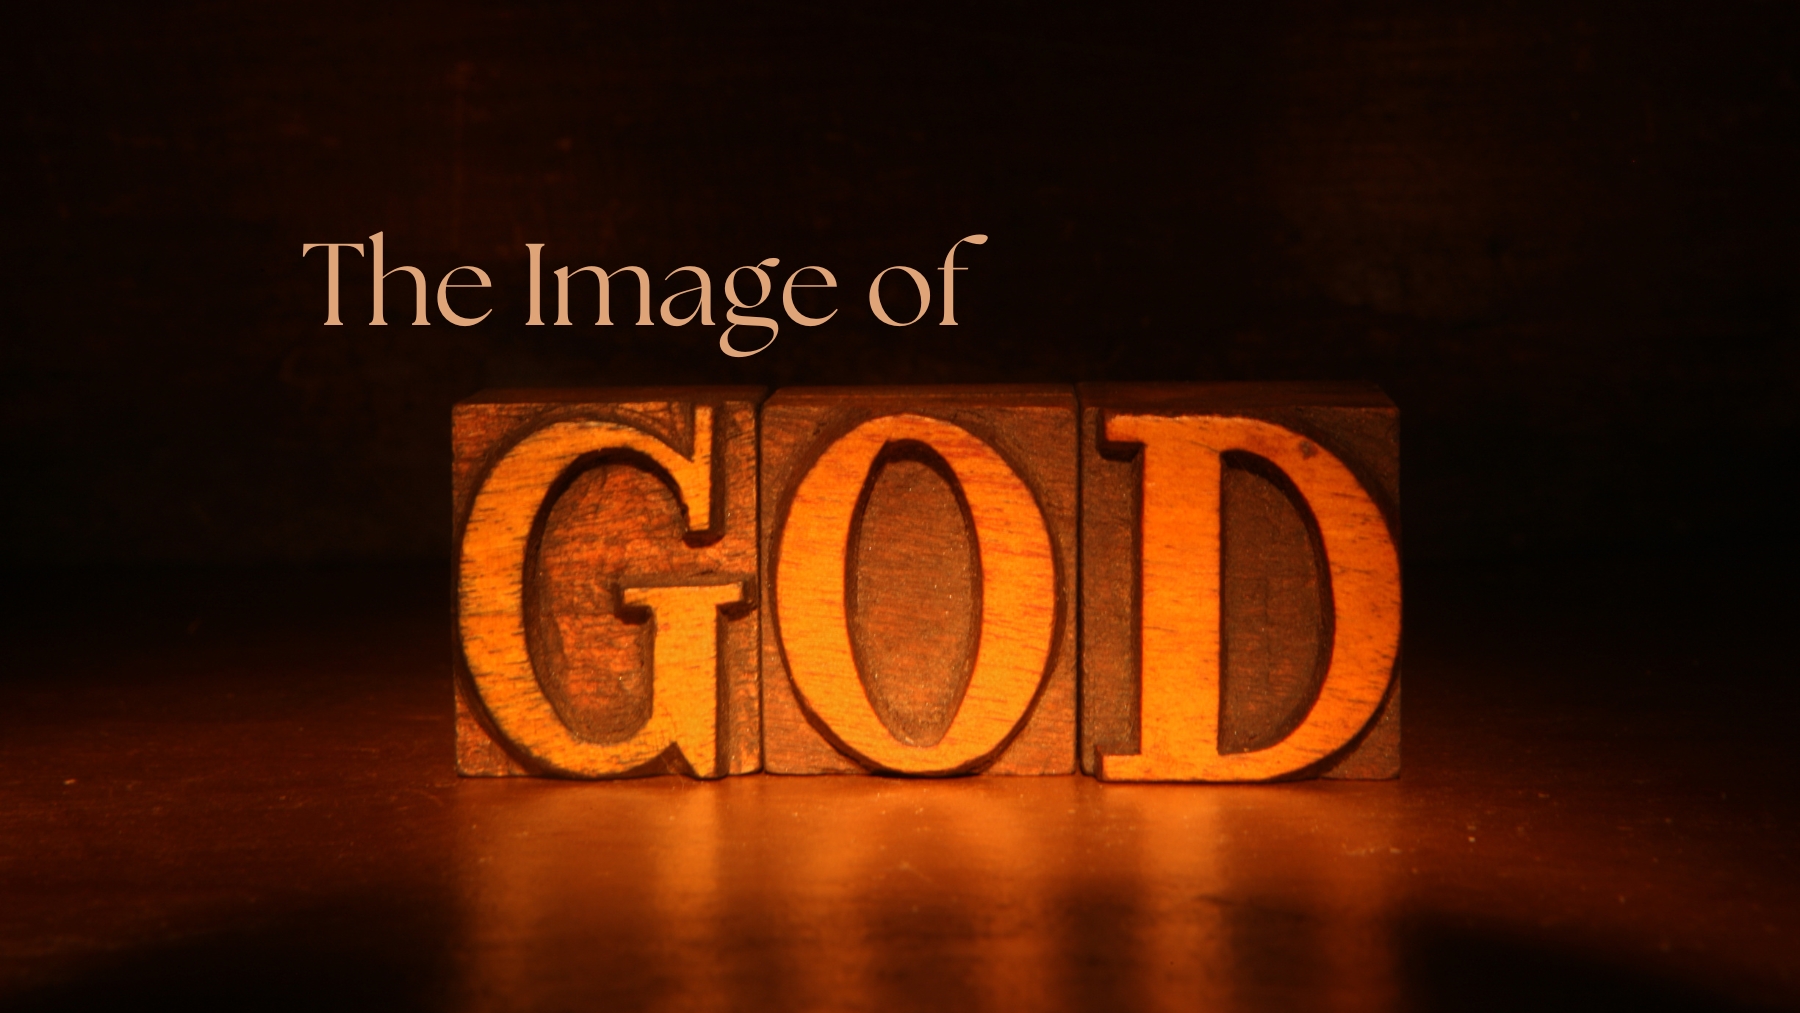 What does it mean to be created in the image of God?